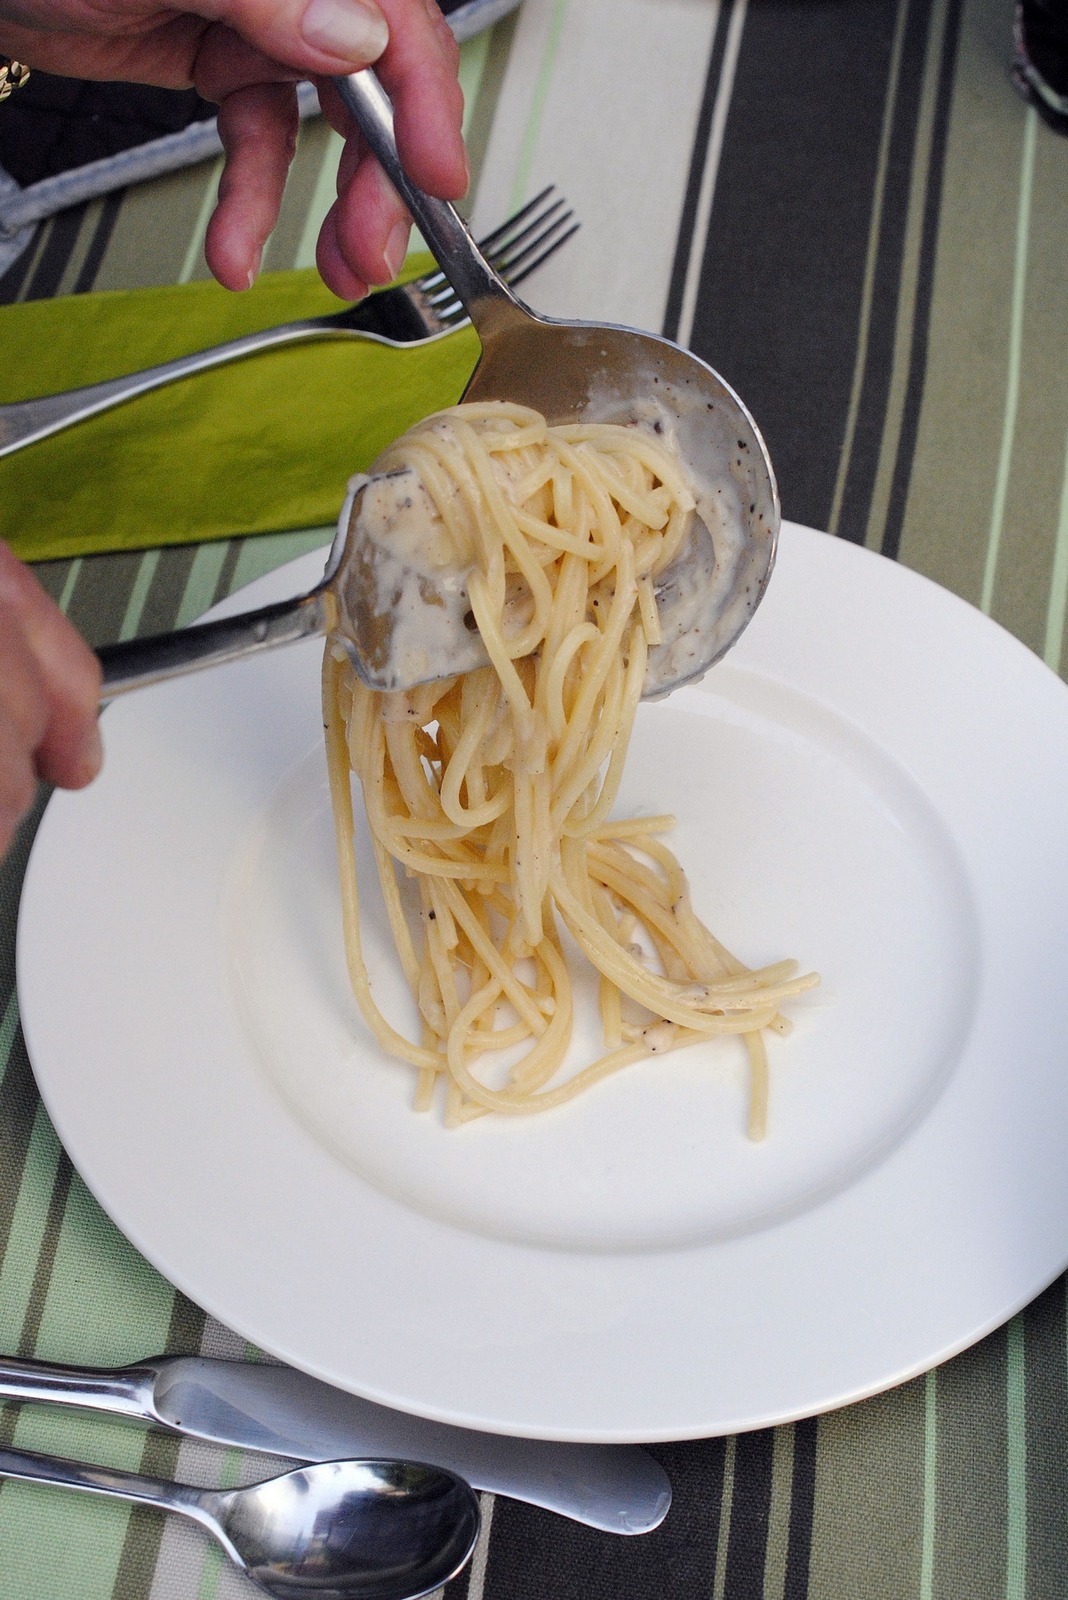 Cacio e Pepe Being Served Outdoors, Green Striped Tablecloth